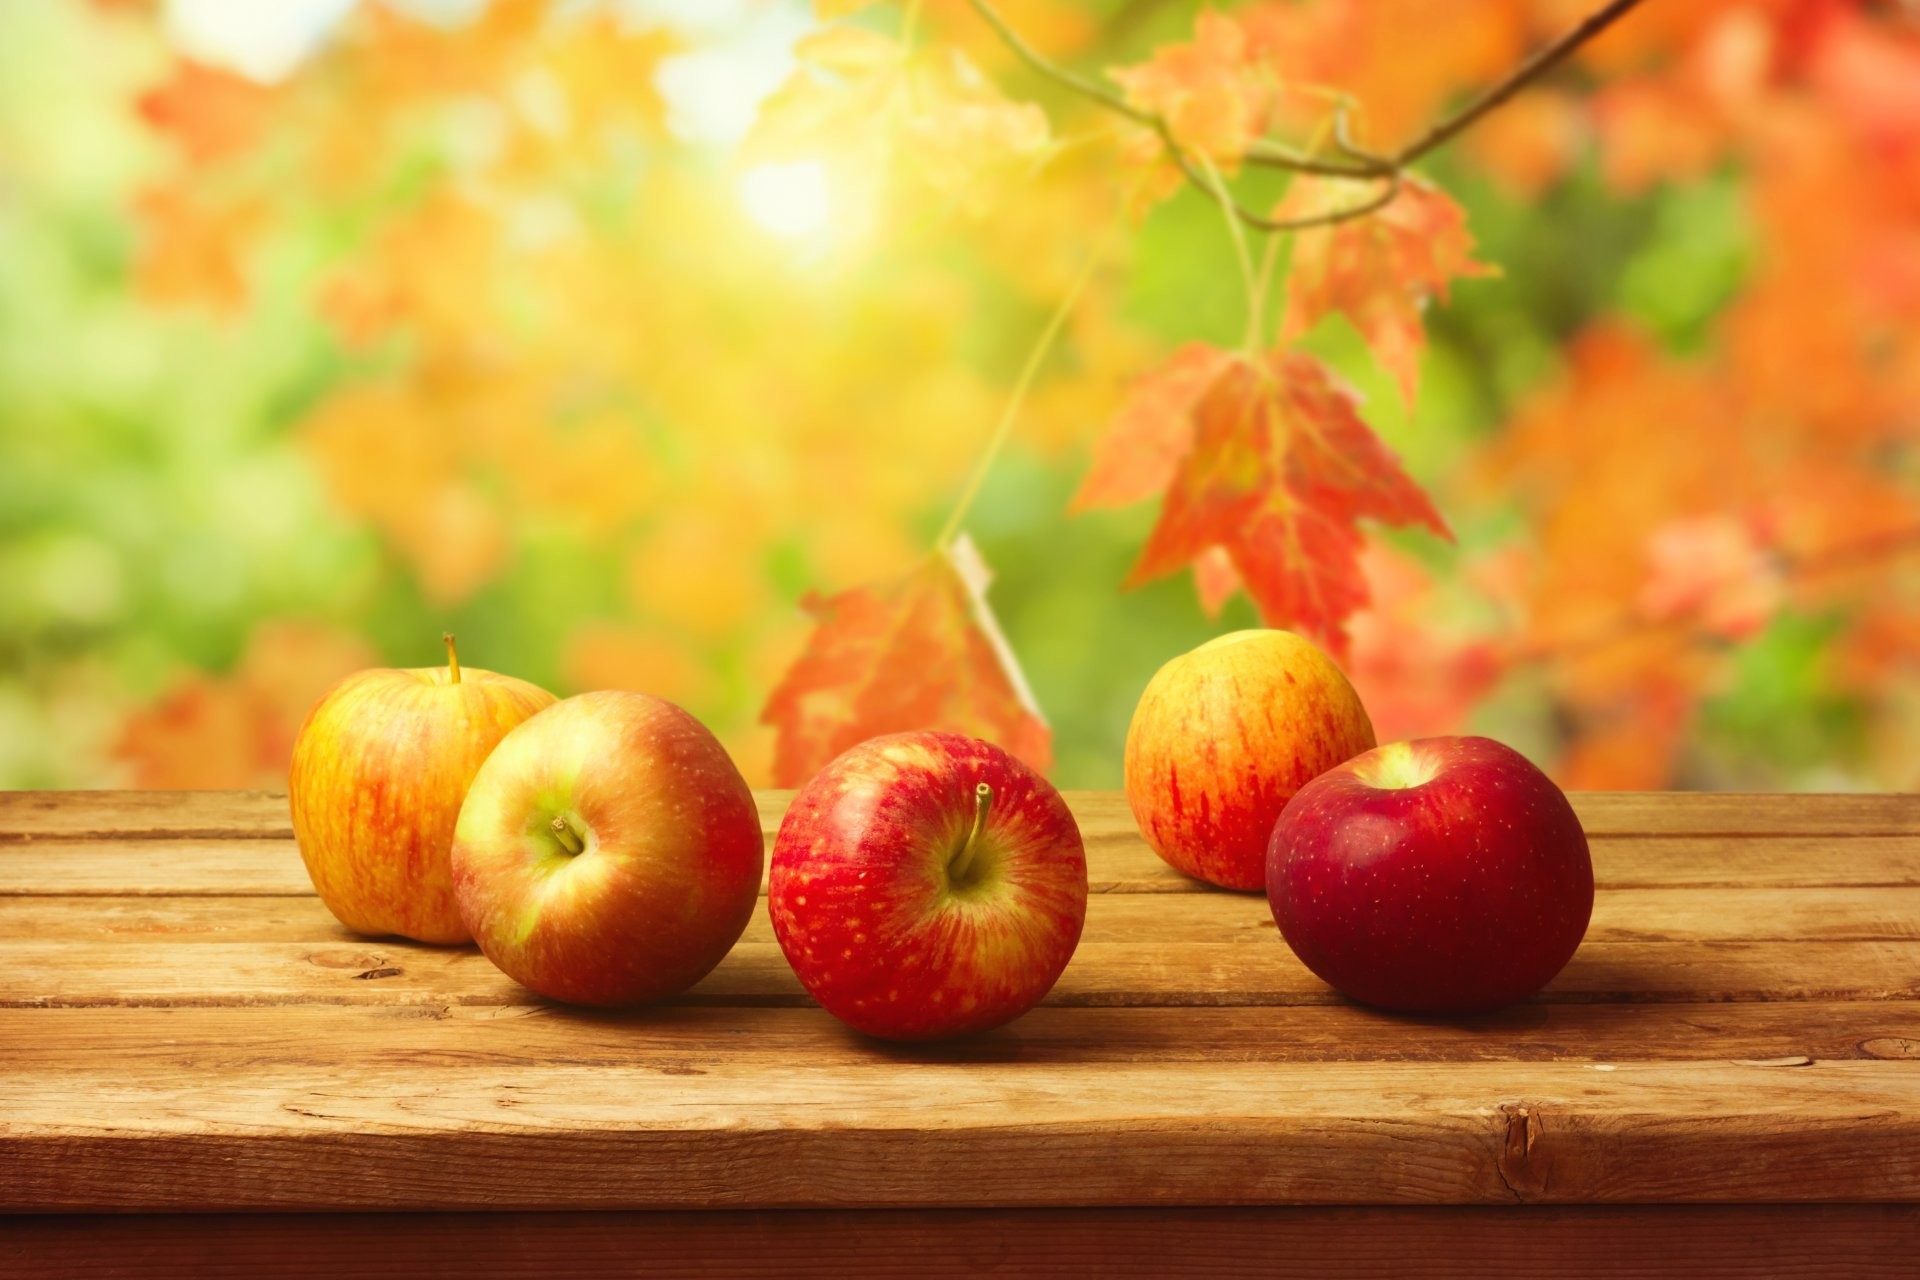 1920x1280 apples table fruits vintage background autumn leaves HD wallpaper